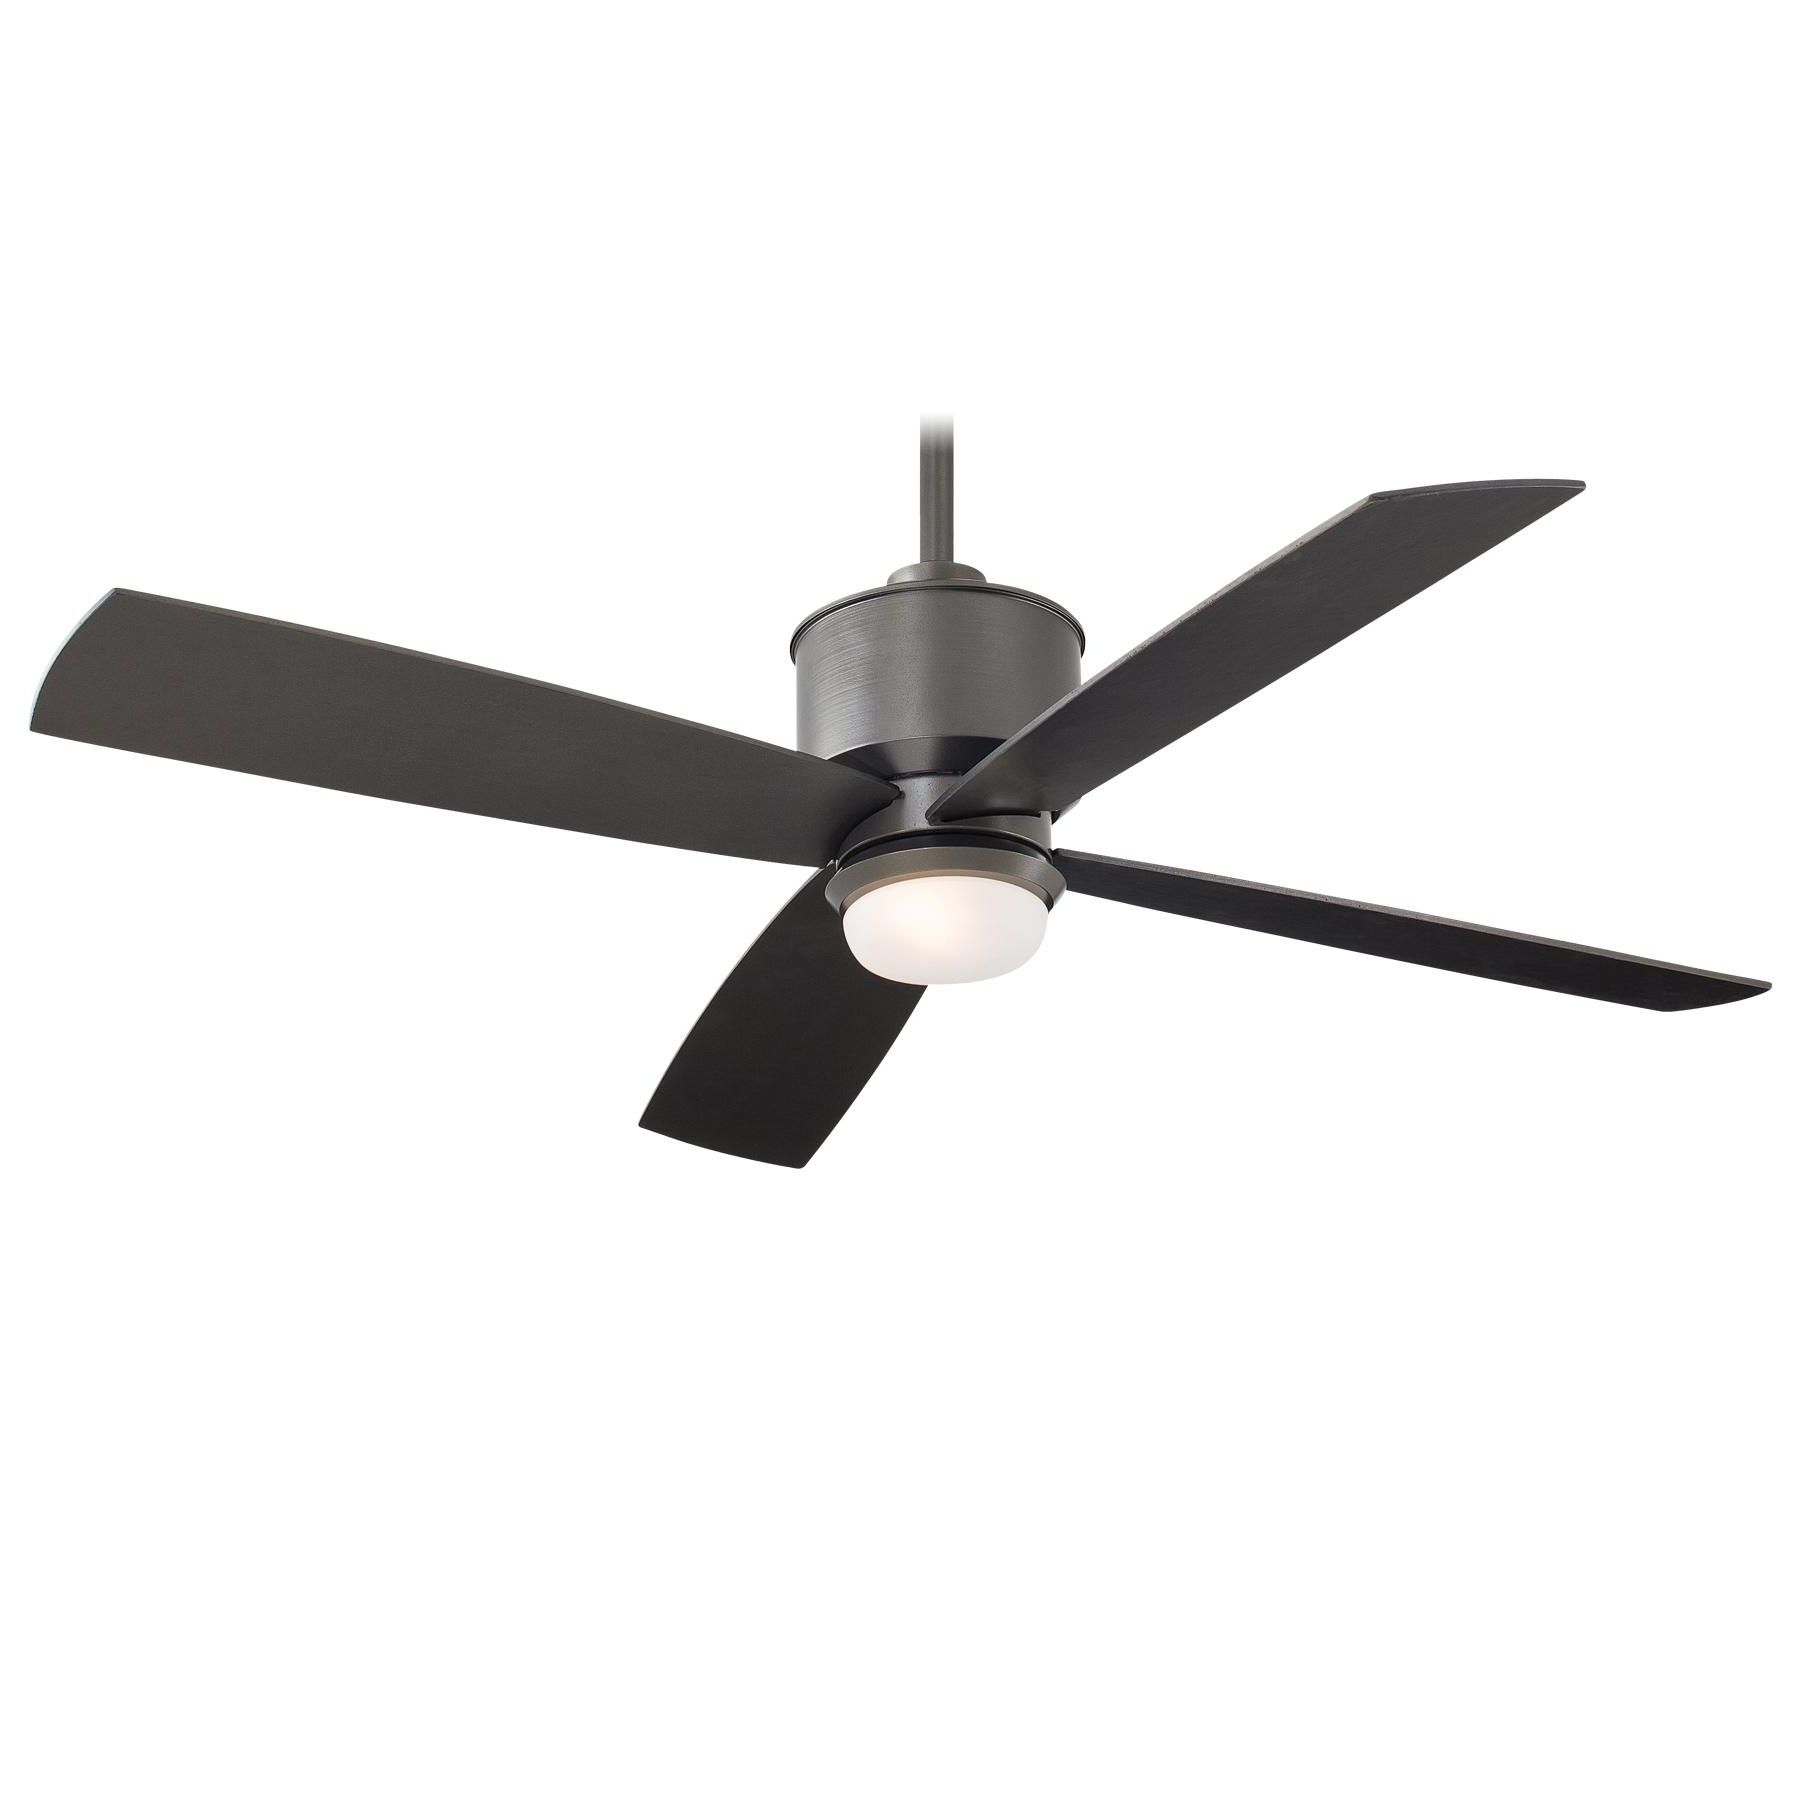 Minka Aire Outdoor Ceiling Fans With Lights Regarding Most Recently Released Strata Ceiling Fanminka Aire (View 10 of 20)